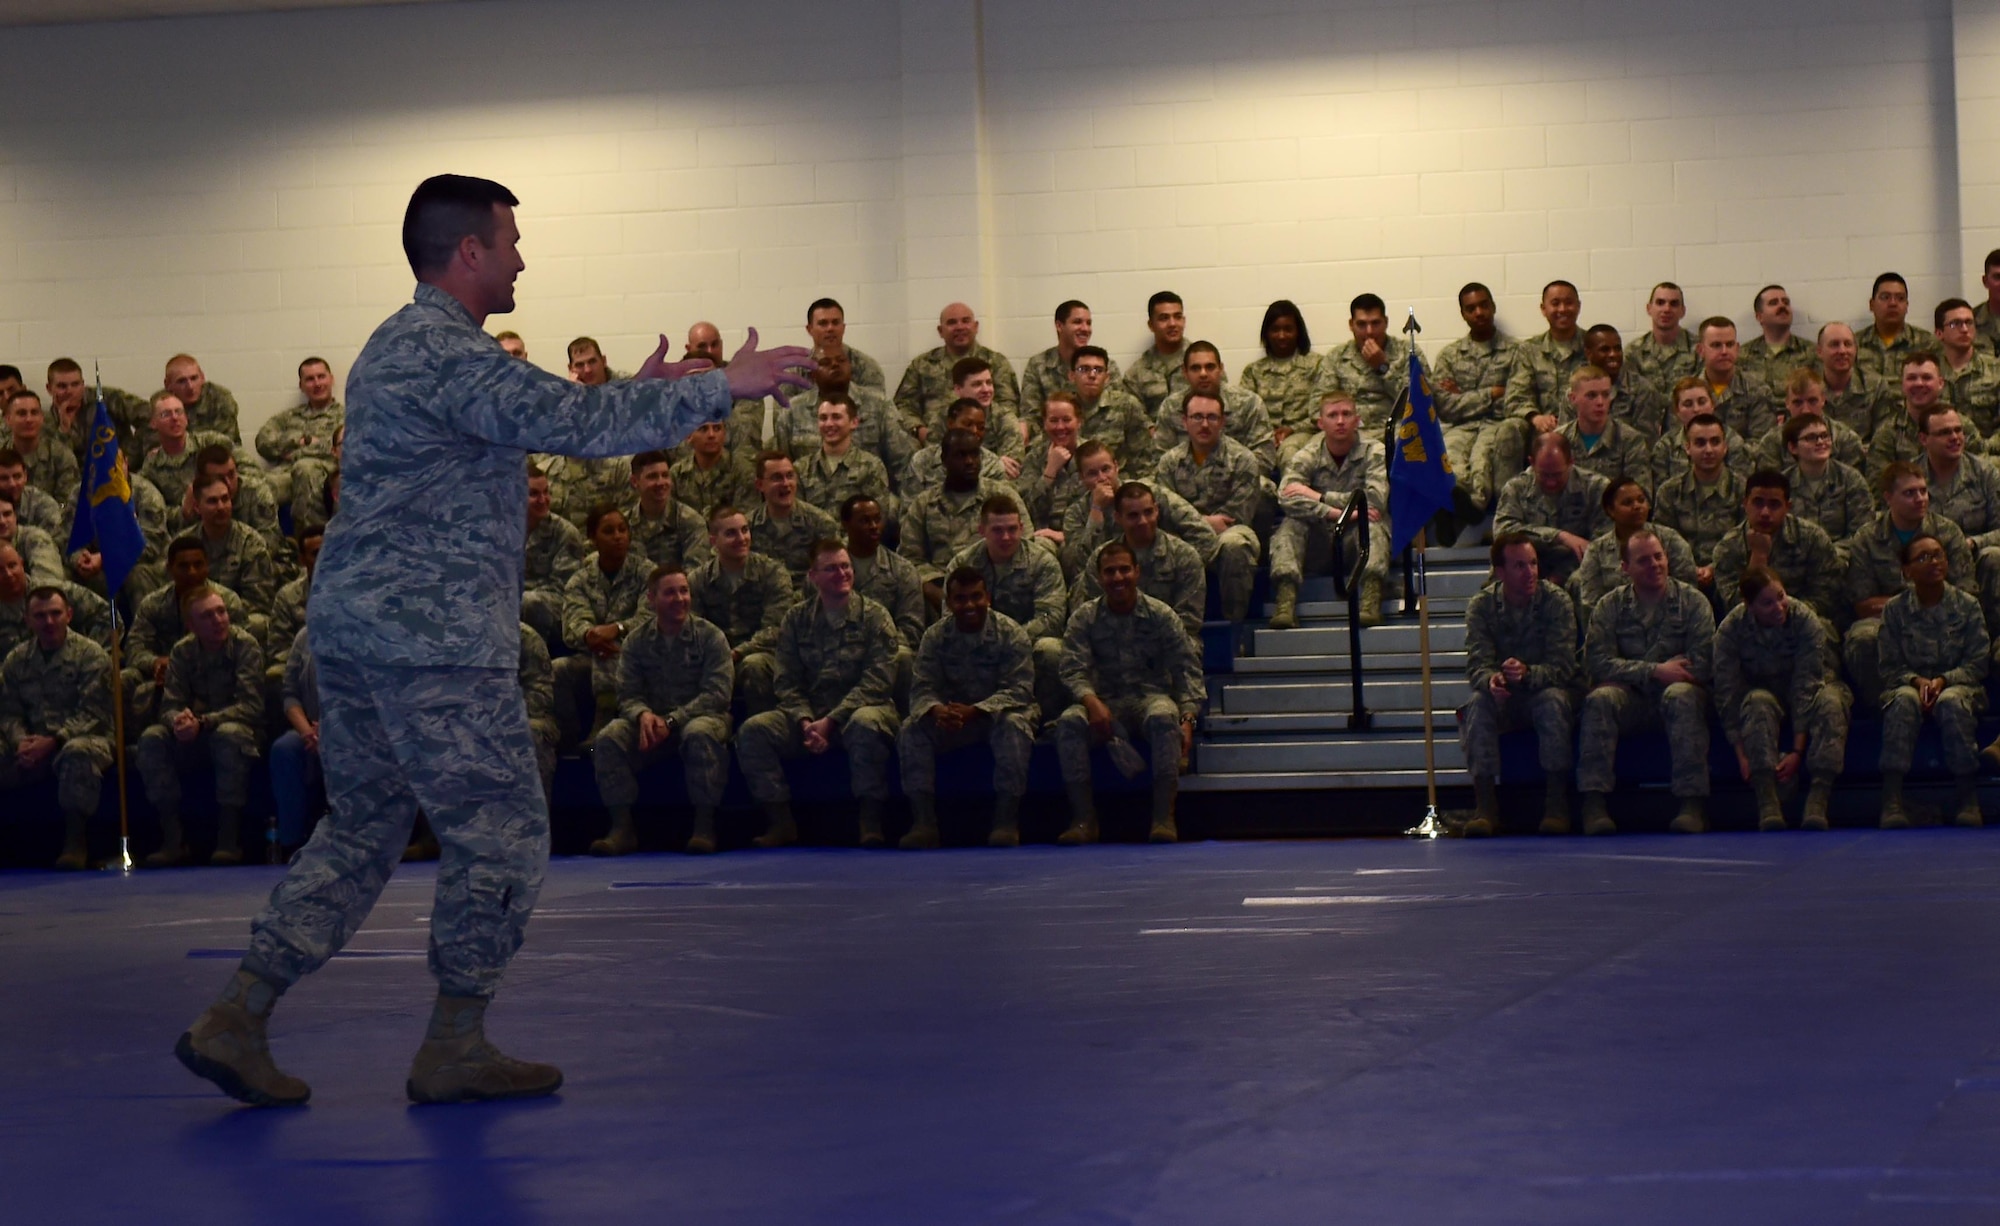 Col. John Wagner, 460th Space Wing commander, speaks during a commander’s call April 22, 2016, at the fitness center on Buckley Air Force Base, Colo. Wagner thanked the wing for their mission support, congratulated award winners and discussed recently completed projects on base. (U.S. Air Force photo by Airman 1st Class Gabrielle Spradling/Released)